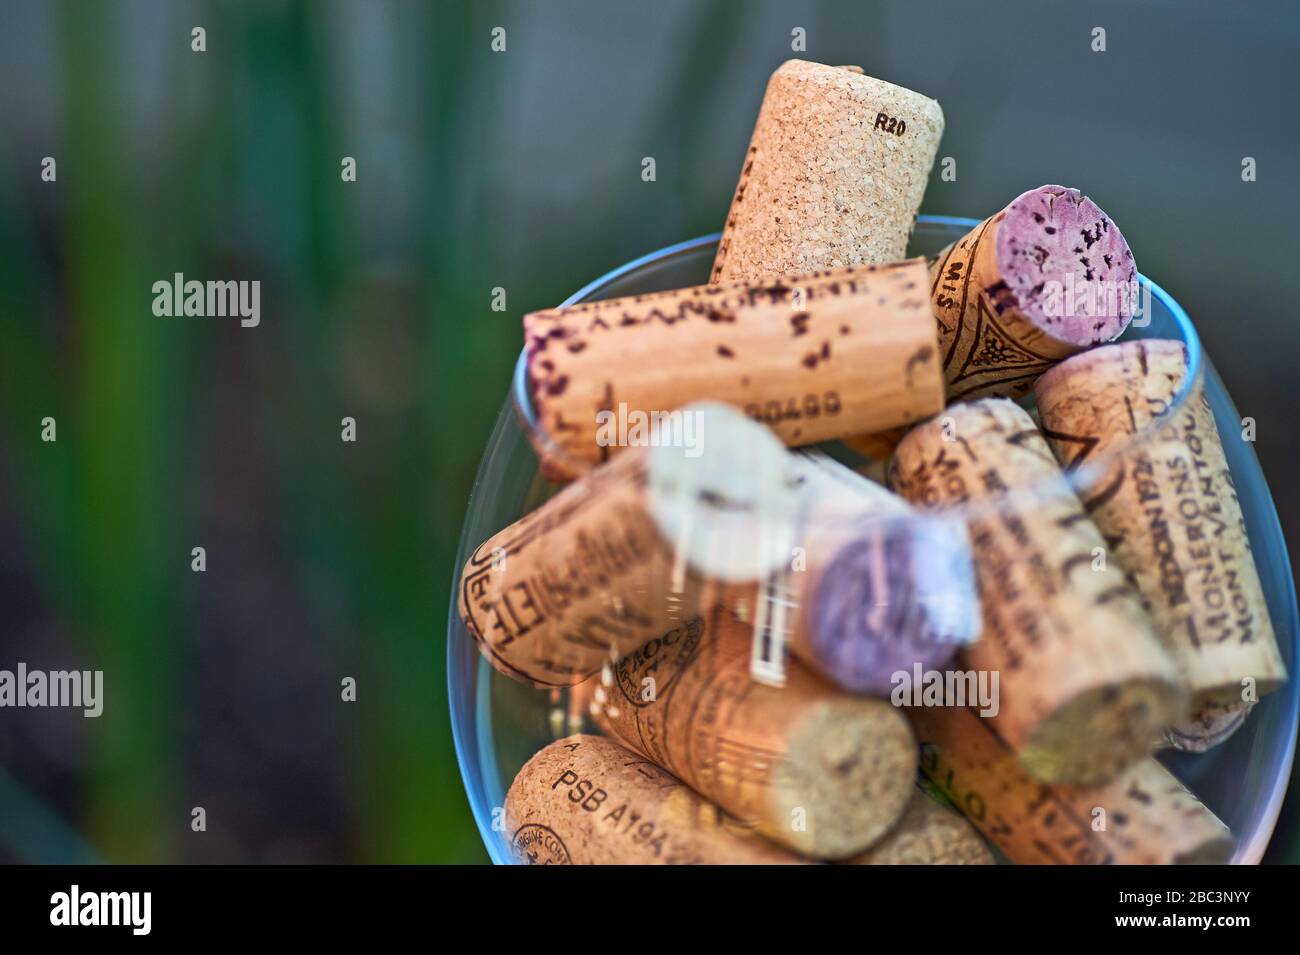 Abstract image of a wine glass full of wine bottles corks. Stock Photo